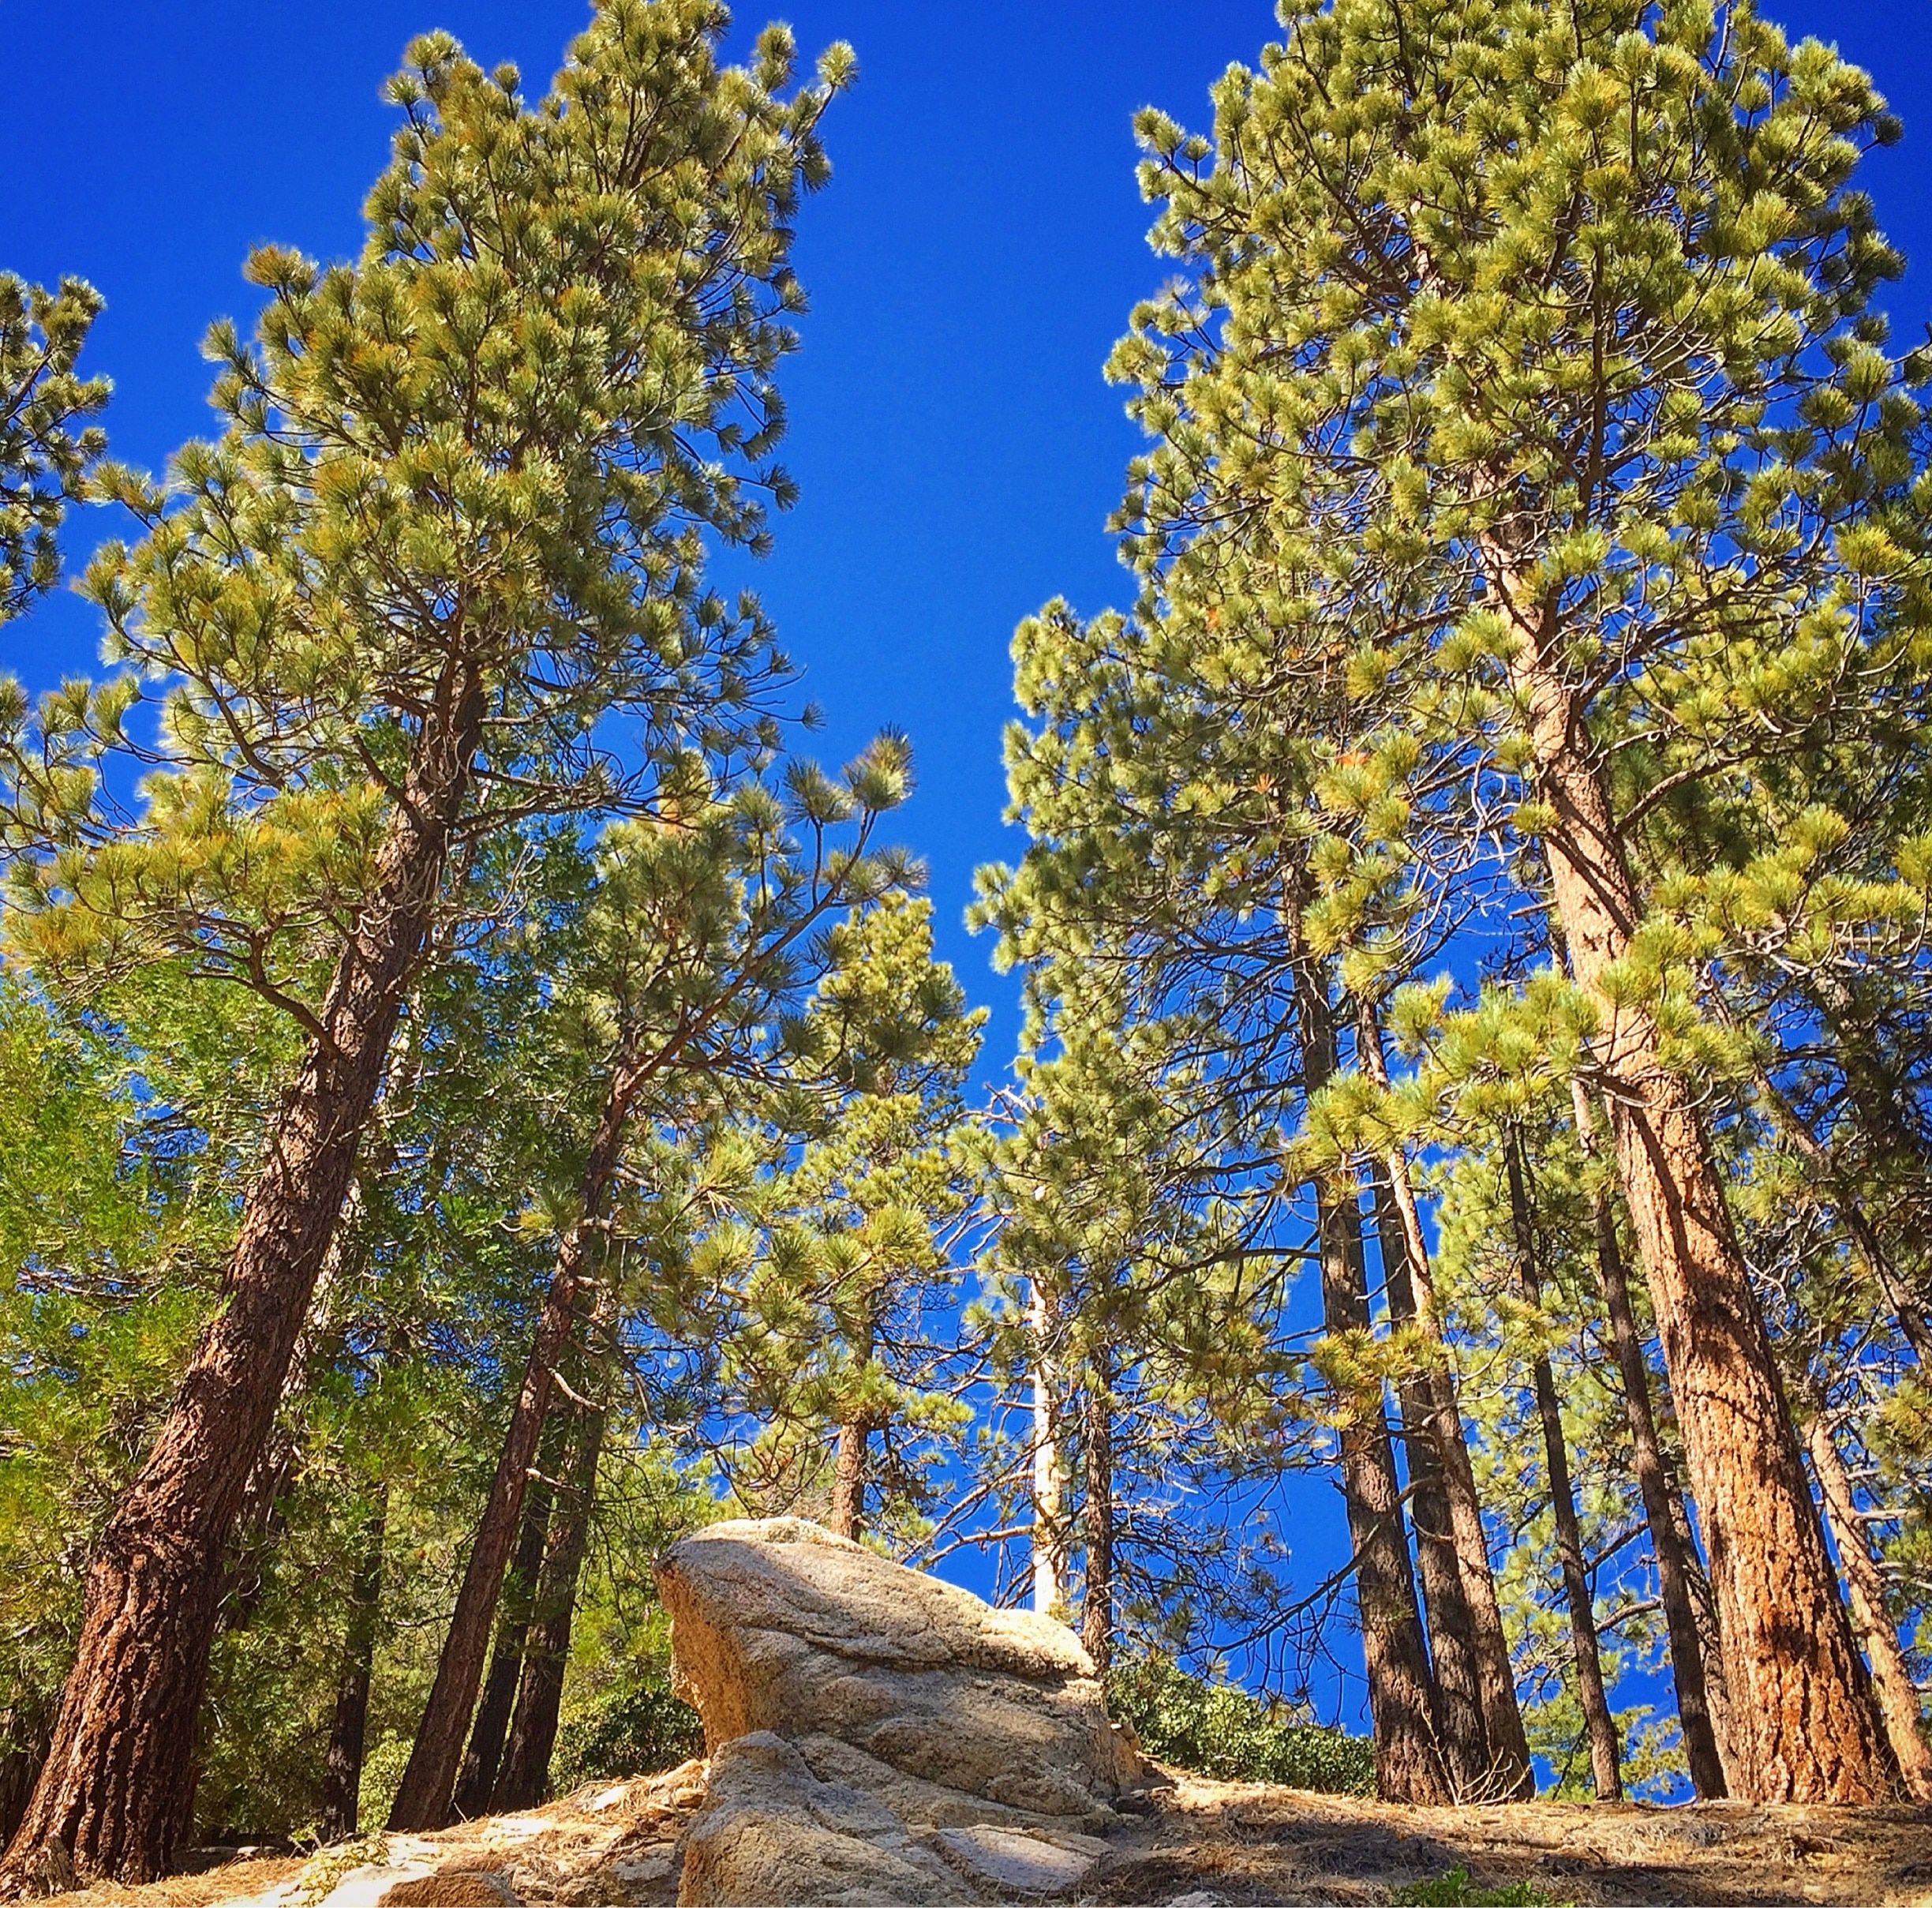 "6,300-foot elevation. 38 campsites among tall pines and cedars. The Burkhart Trail begins here and connects to a vast network of National Recreation Trails , including the High Desert NRT, the Pacific Crest NRT, and the Silver Moccasin NRT.  Maximum RV length 18 feet. Be Aware of Bear Activity." ~  
http://www.fs.usda.gov/recarea/angeles/recreation/recarea/?recid=41690&actid=29 #Hiking